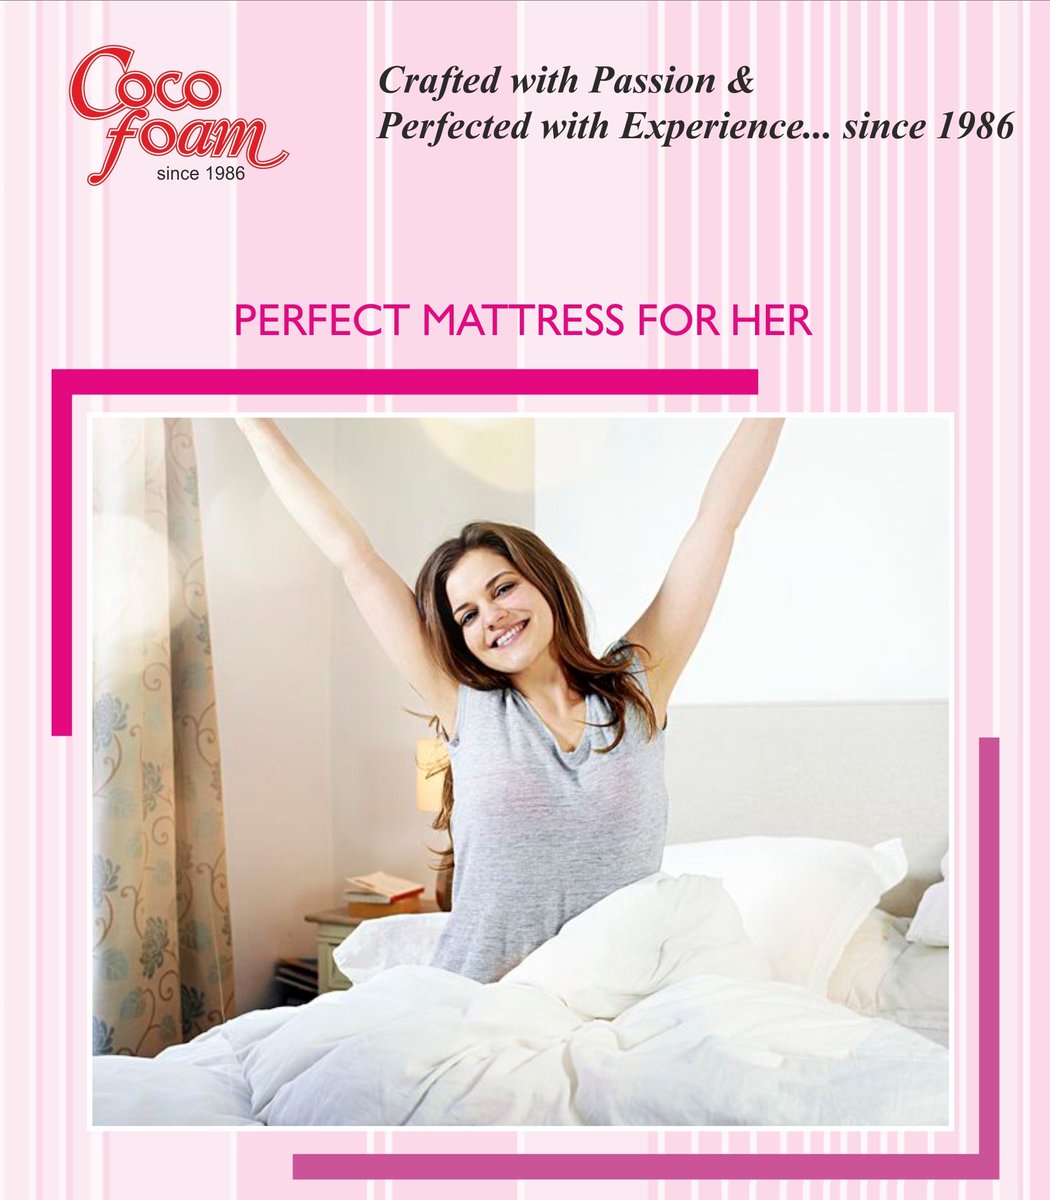 Optimum sleep is required for the body to recover from brain cell damage and protect itself against illnesses. 
Give your body the comfort it needs for cell regeneration with Cocofoam Mattress
#mattress #luxurymattress #springmattress #foammattress #pillow #duvets